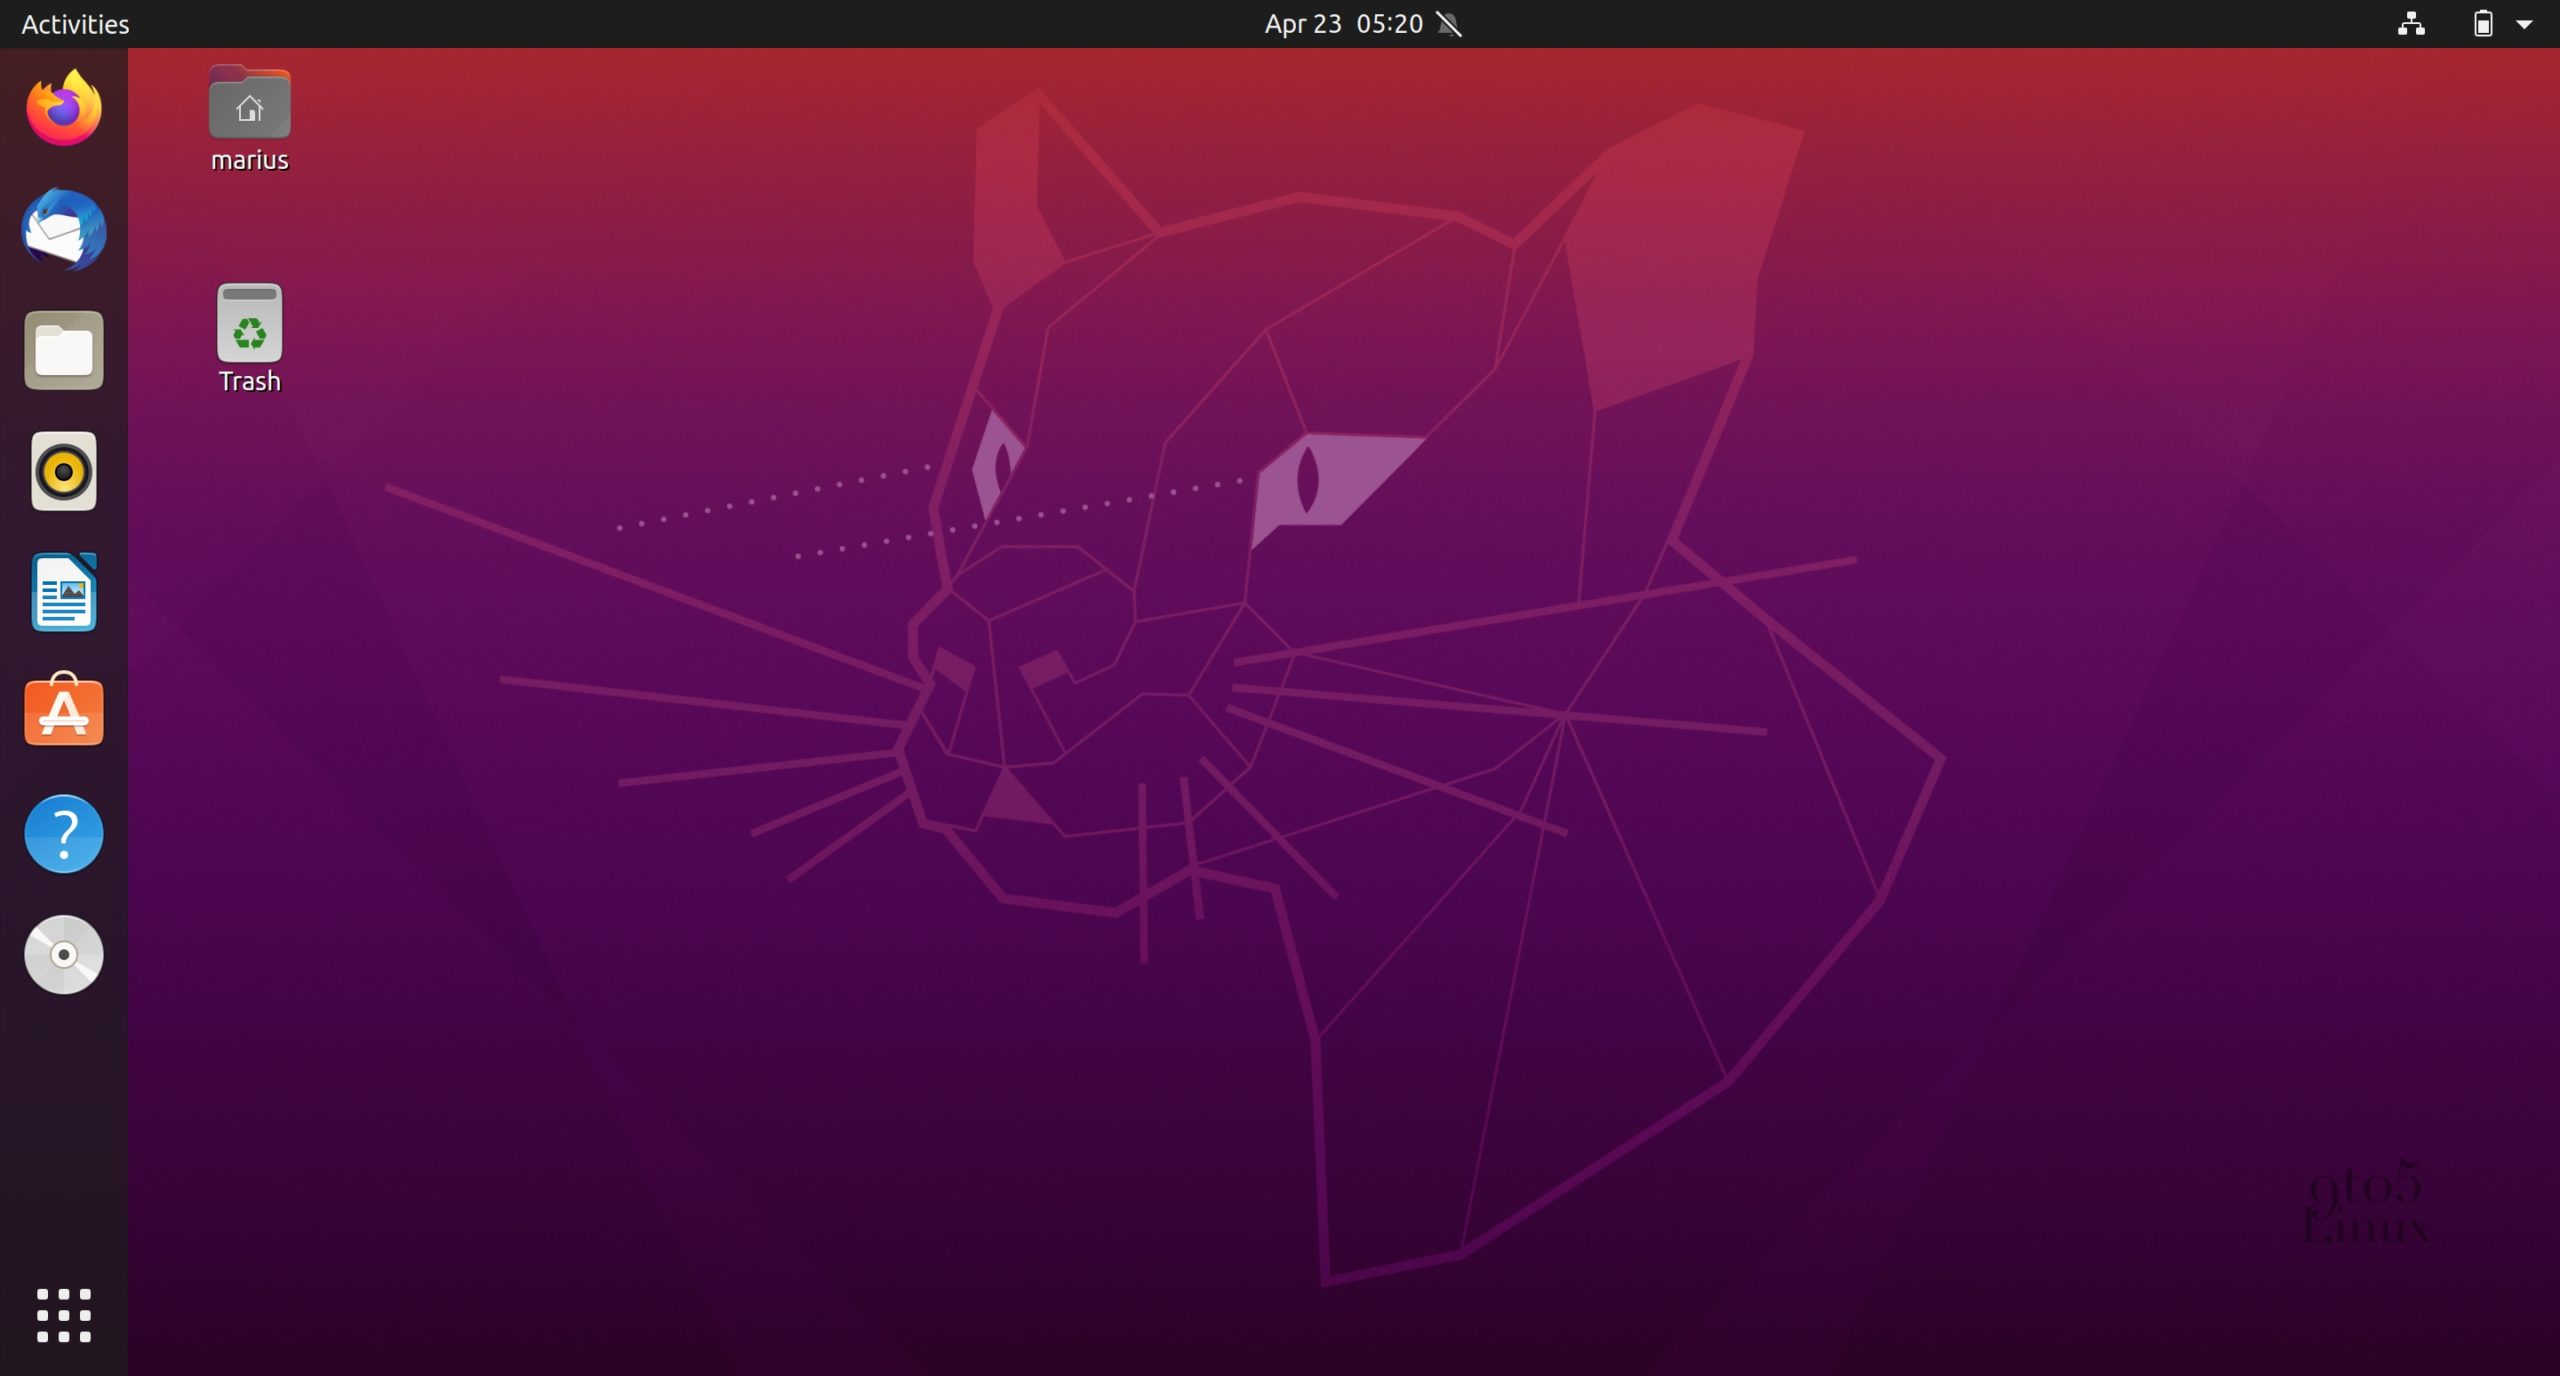 Ubuntu 20.04.1 LTS (Focal Fossa) Slated for Release on August 6th